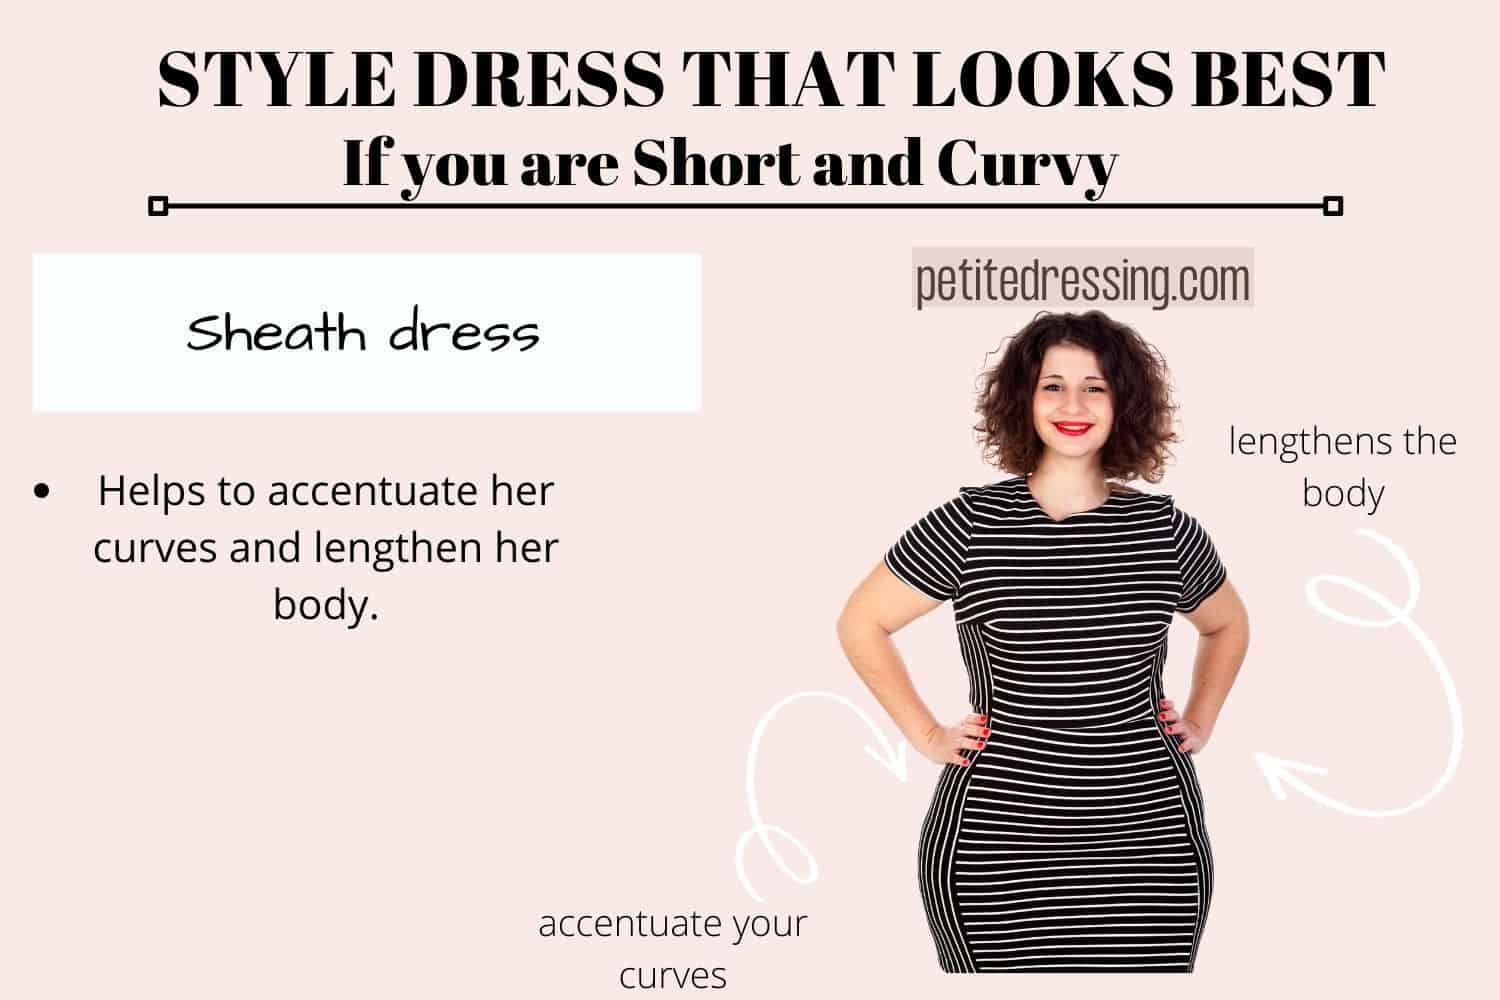 The Dress Guide for Short and Curvy Women